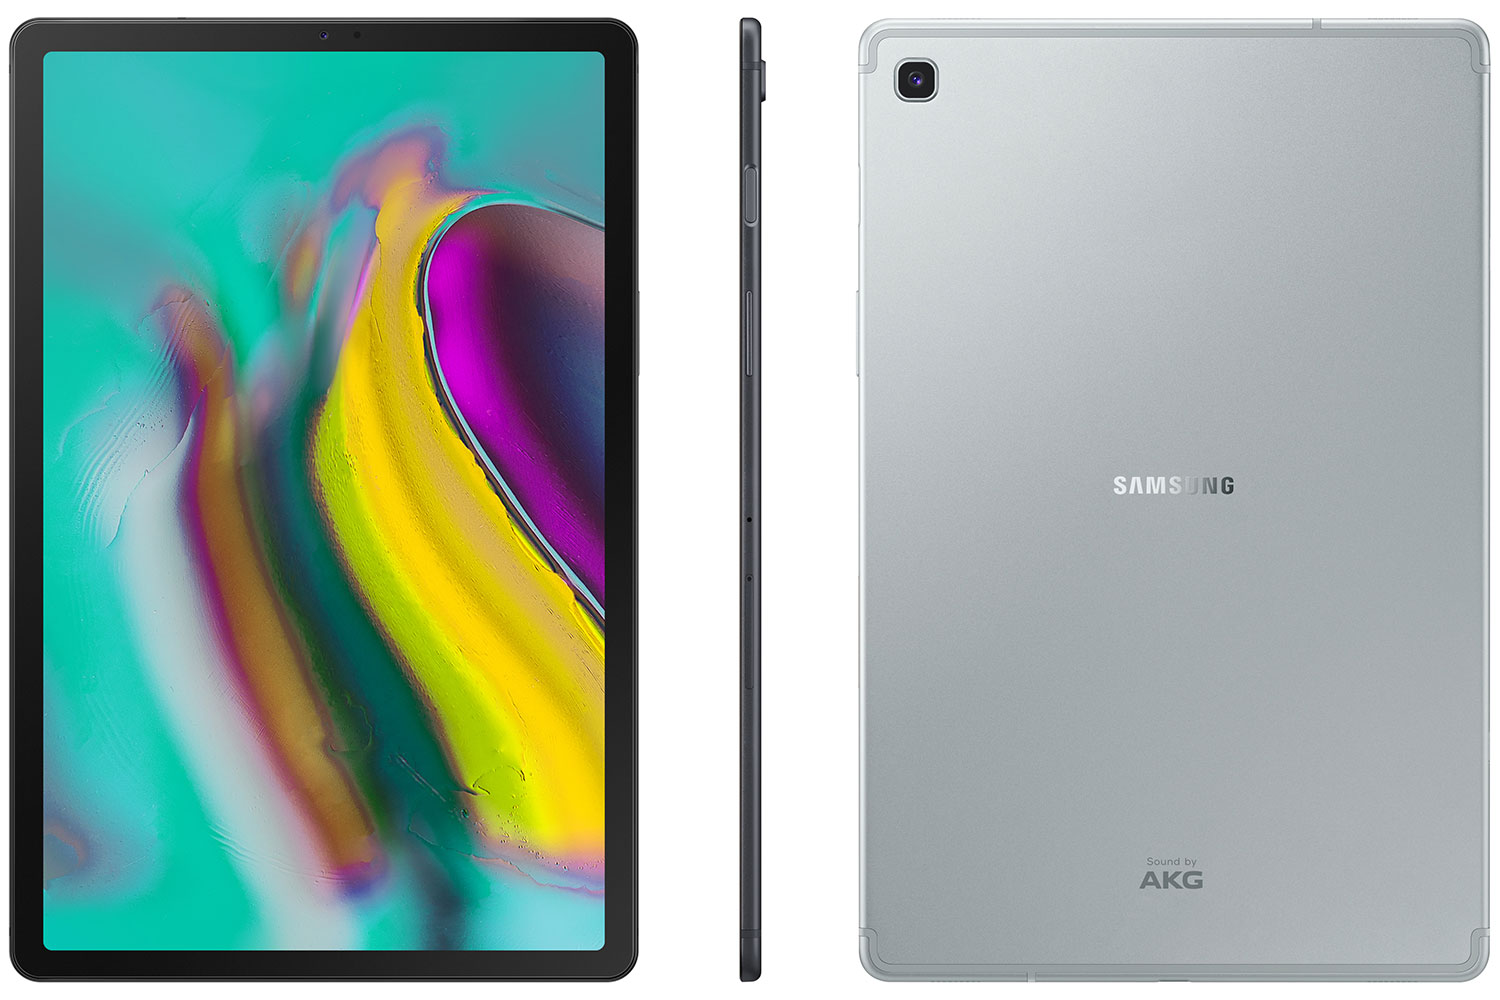 Samsung Galaxy Tab S5e: 10.5inch, 0.87 Lbs, Android Tablet